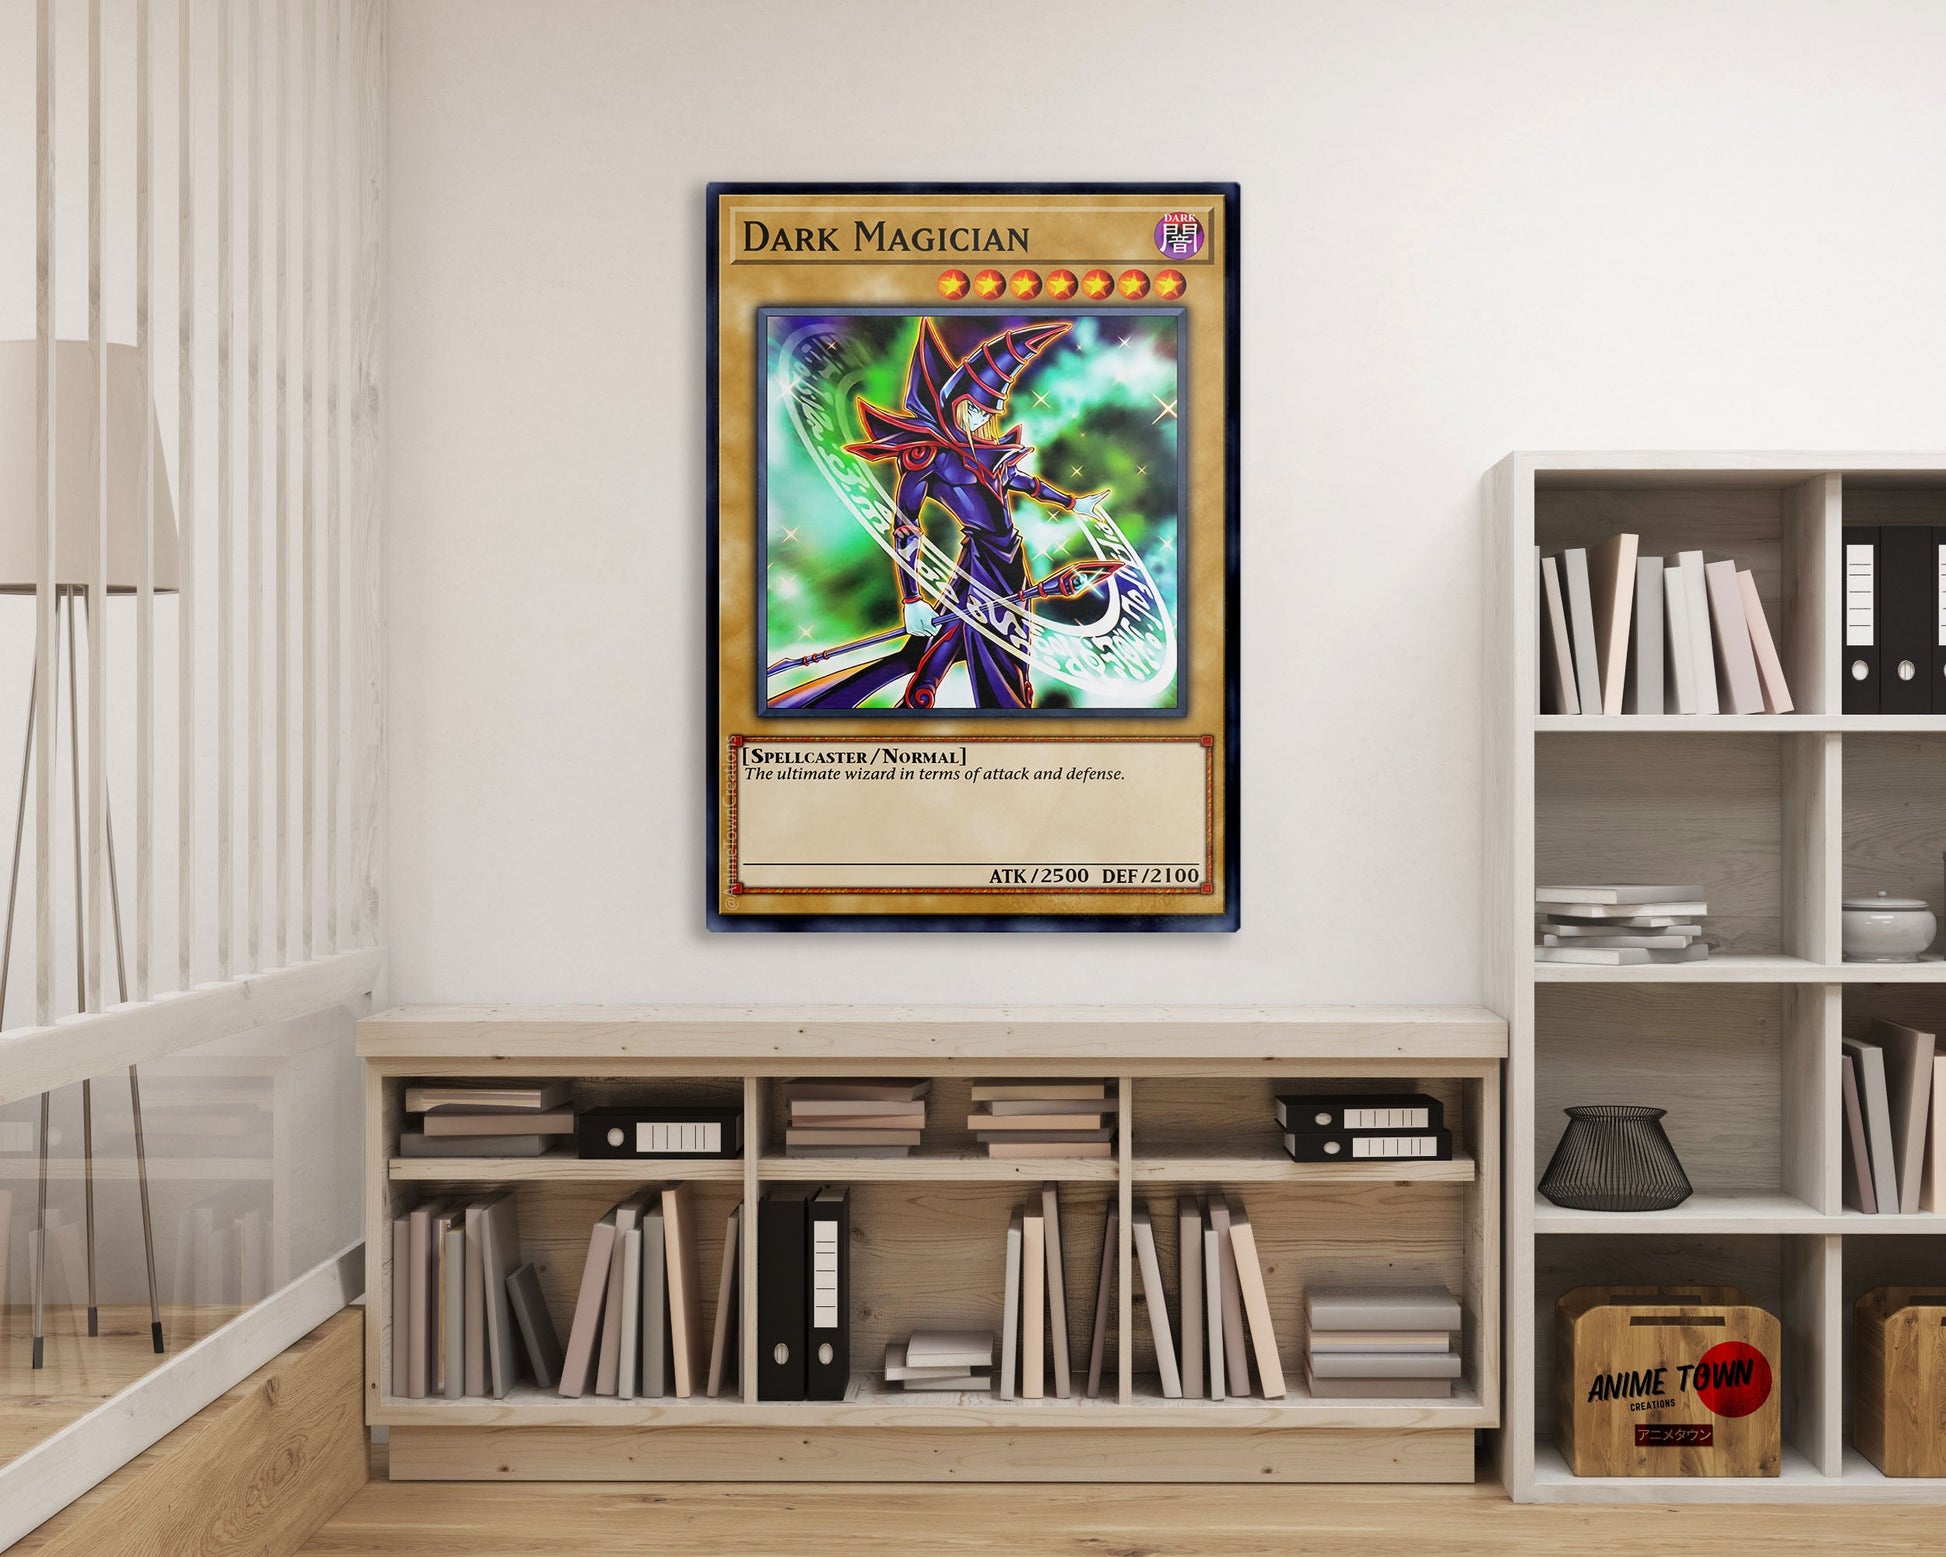 Anime Town Creations Metal Poster Yugioh Dark Magician 1st Edition Card 16" x 24" Home Goods - Anime Yu-Gi-Oh Metal Poster